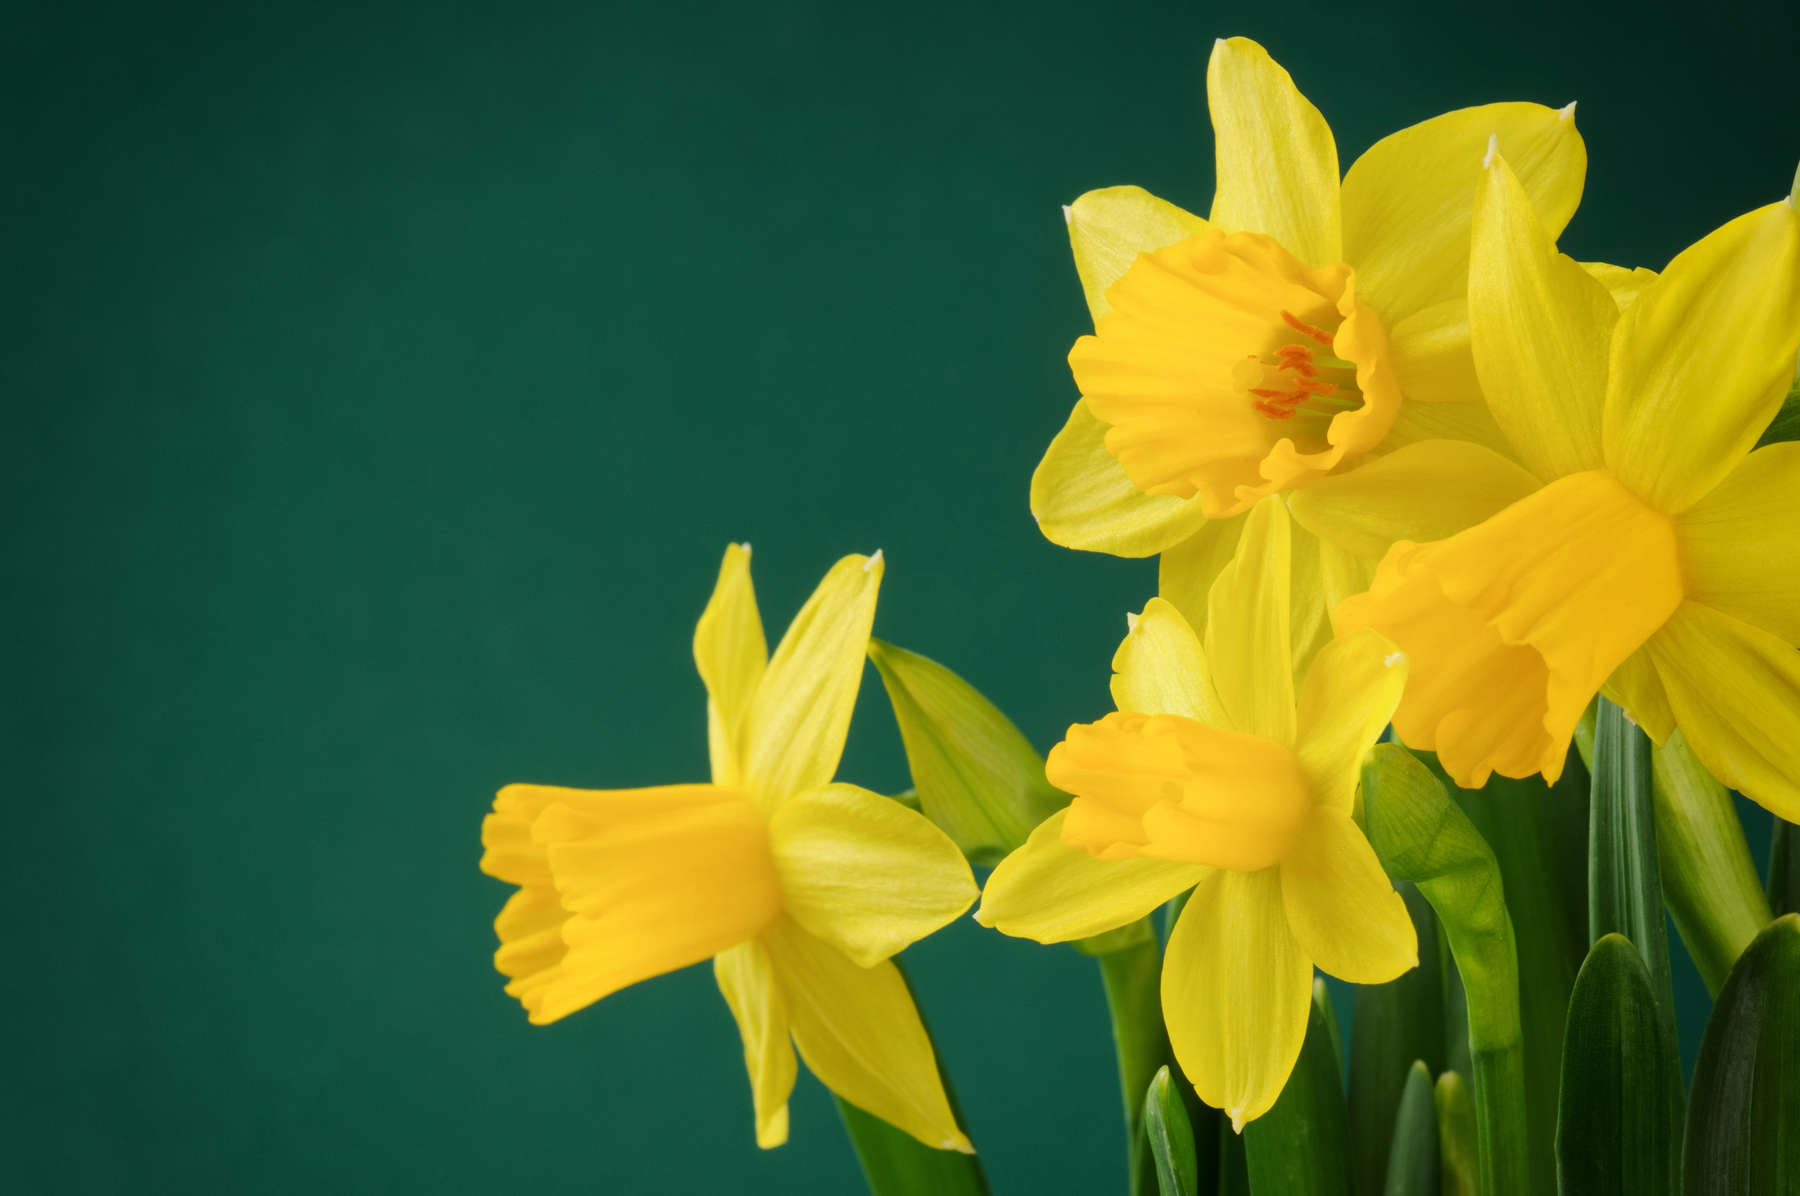 Yellow daffodils on green background